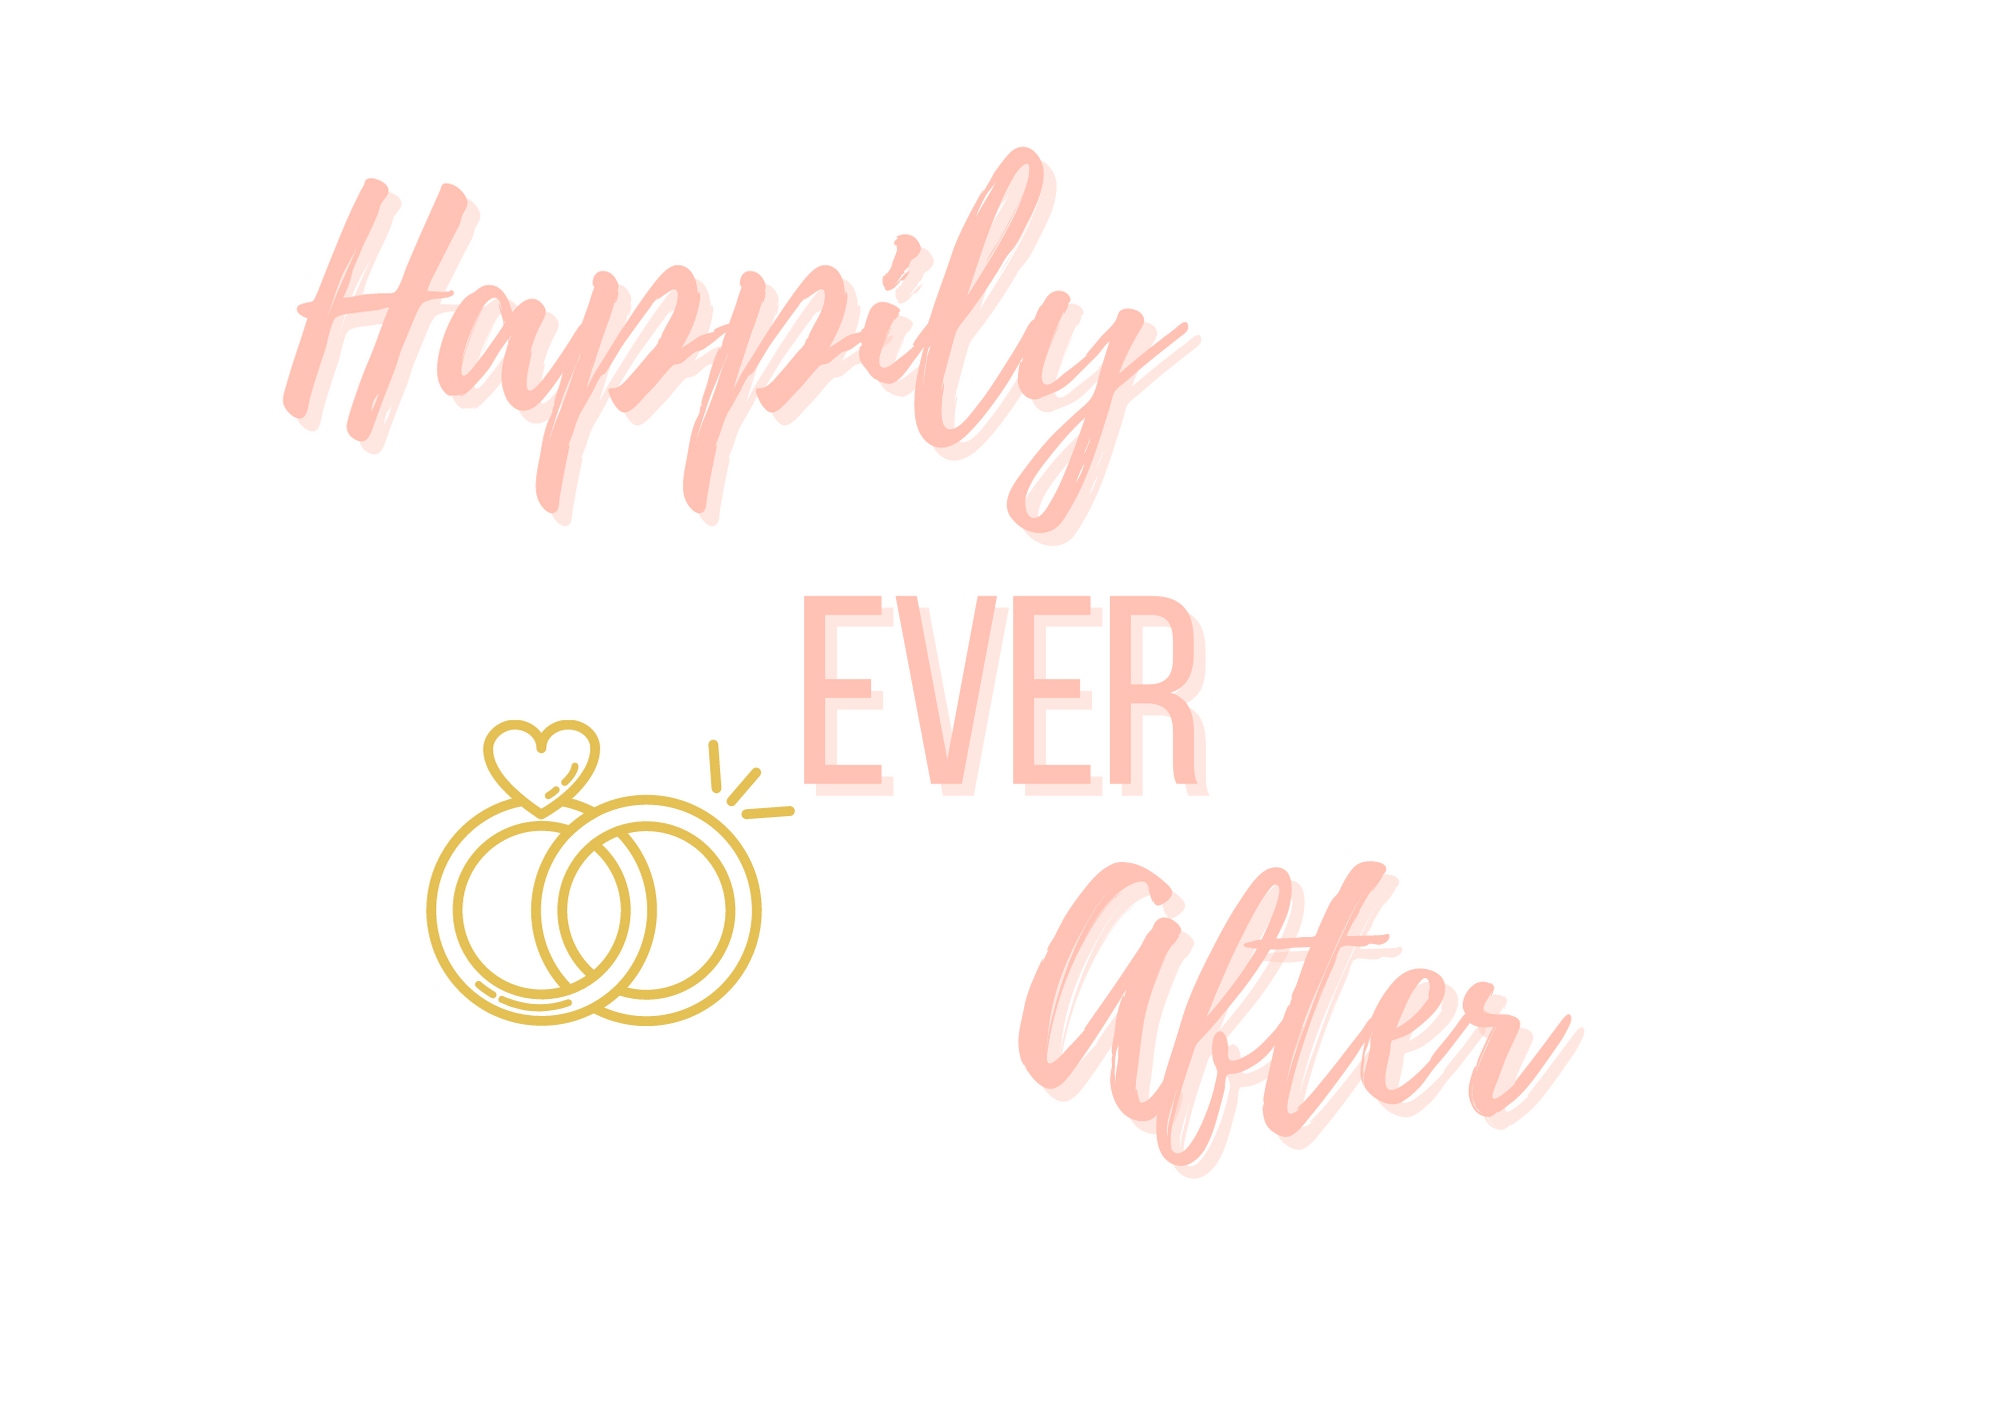 White seed paper greeting card saying "Happily Ever After